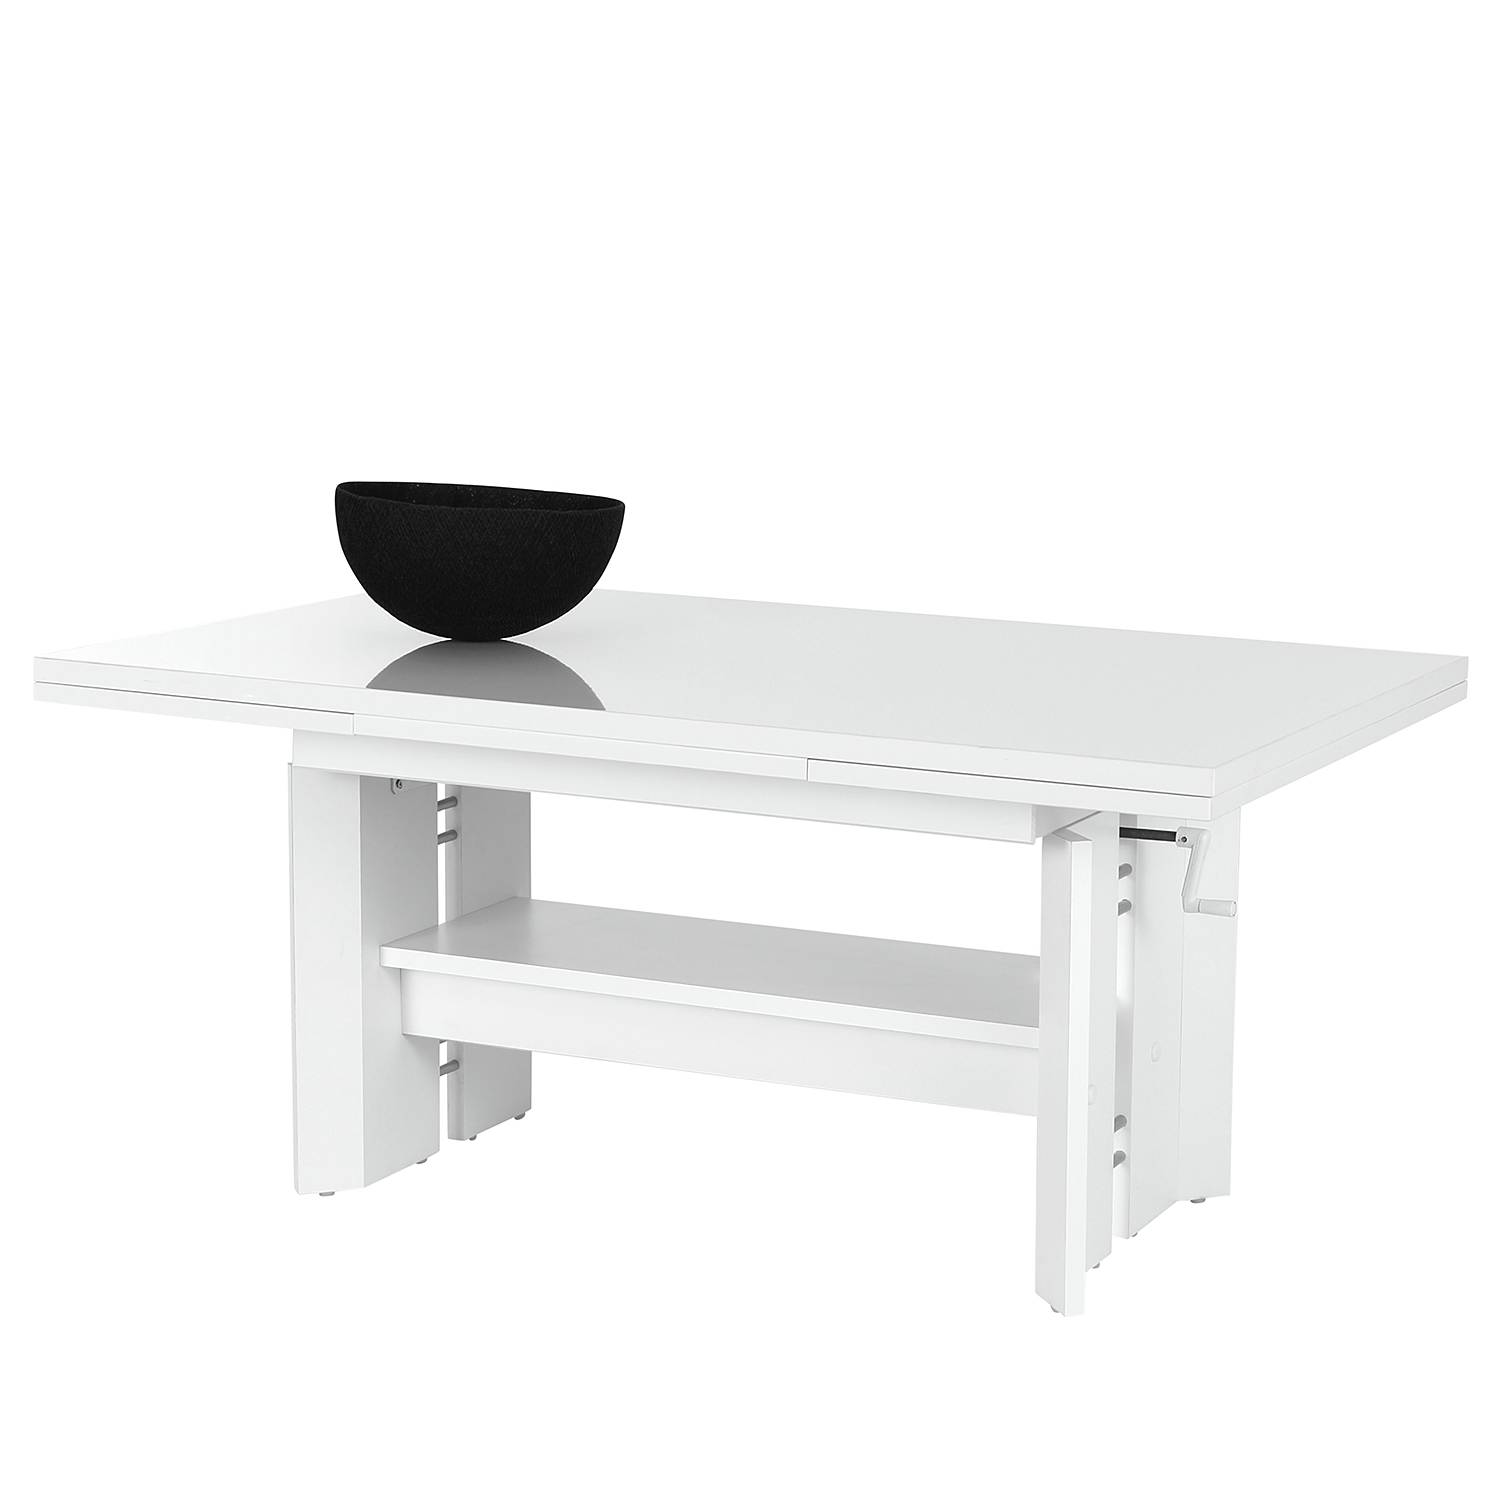 Table basse Adro